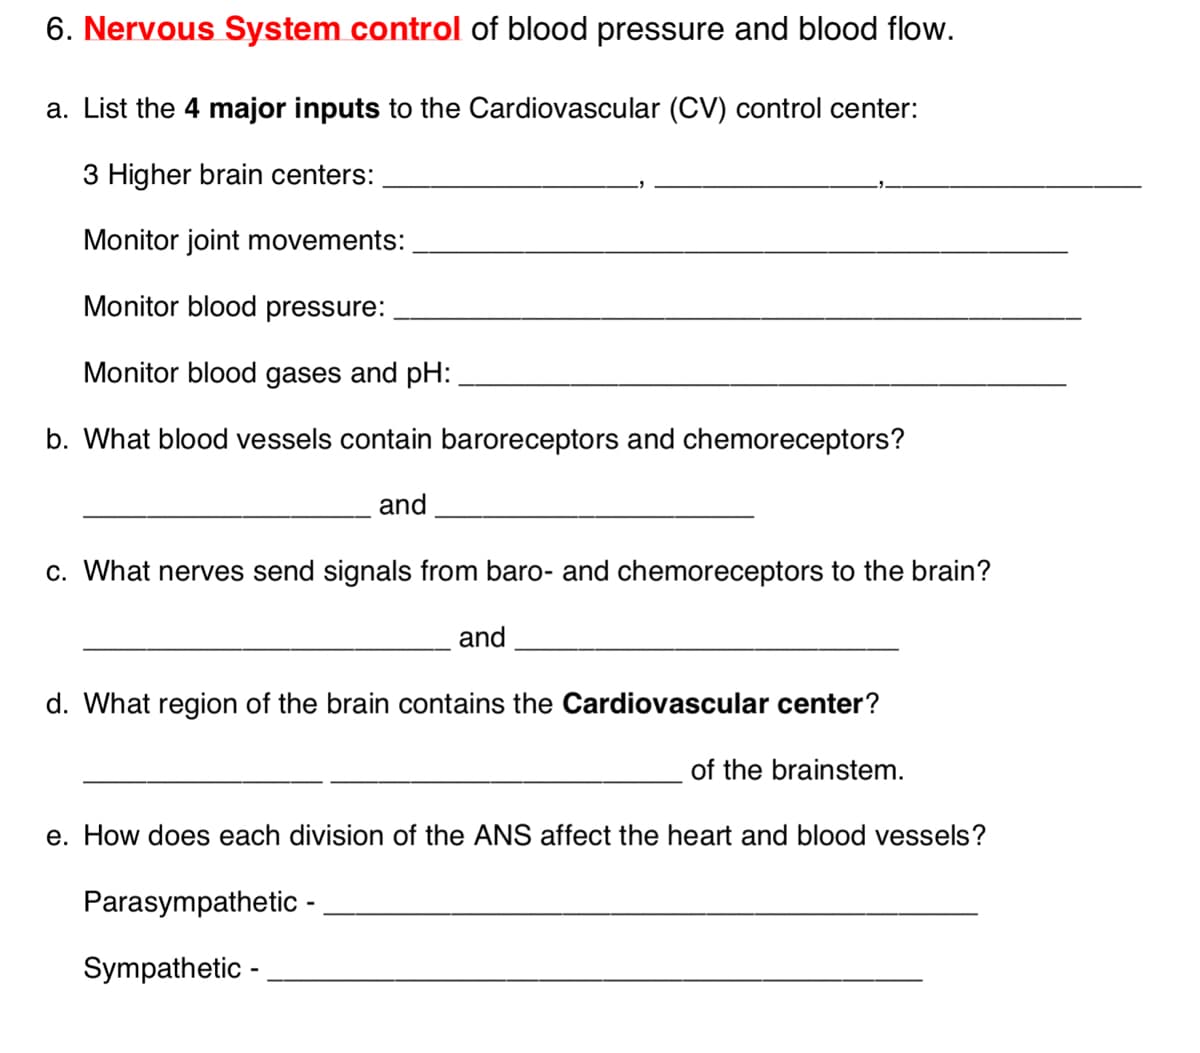 6. Nervous System control of blood pressure and blood flow.
a. List the 4 major inputs to the Cardiovascular (CV) control center:
3 Higher brain centers:
Monitor joint movements:
Monitor blood pressure:
Monitor blood gases and pH:
b. What blood vessels contain baroreceptors and chemoreceptors?
and.
c. What nerves send signals from baro- and chemoreceptors to the brain?
and
d. What region of the brain contains the Cardiovascular center?
of the brainstem.
e. How does each division of the ANS affect the heart and blood vessels?
Parasympathetic -
Sympathetic - .
